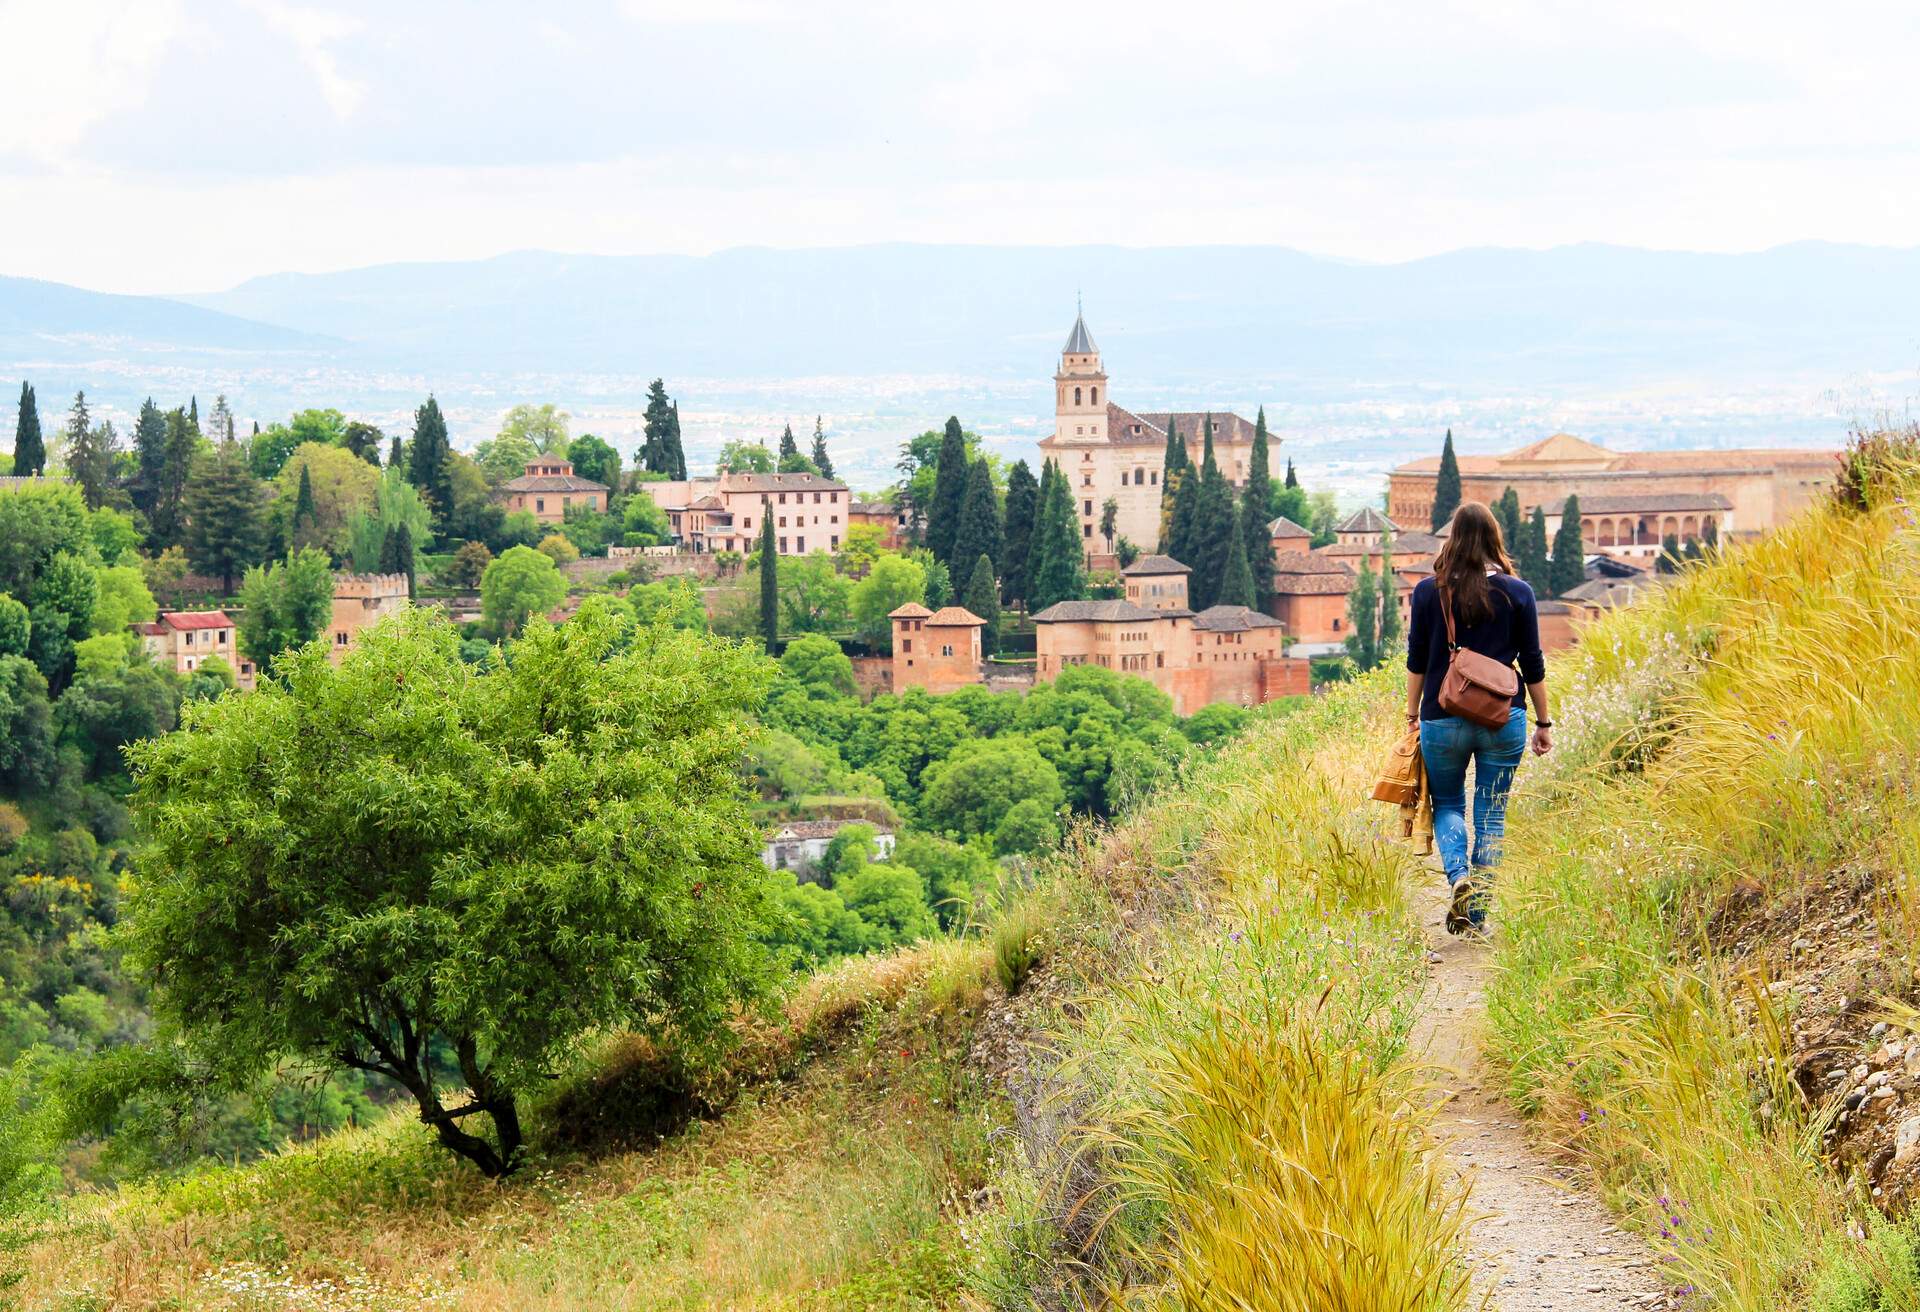 Granada is located at the foot of the Sierra Nevada mountains and it's most famous monument is the Alhambra, a Moorish citadel and palace. It is the most renowned building of the Andalusian Islamic historical legacy and one of the most visited monuments in Spain.